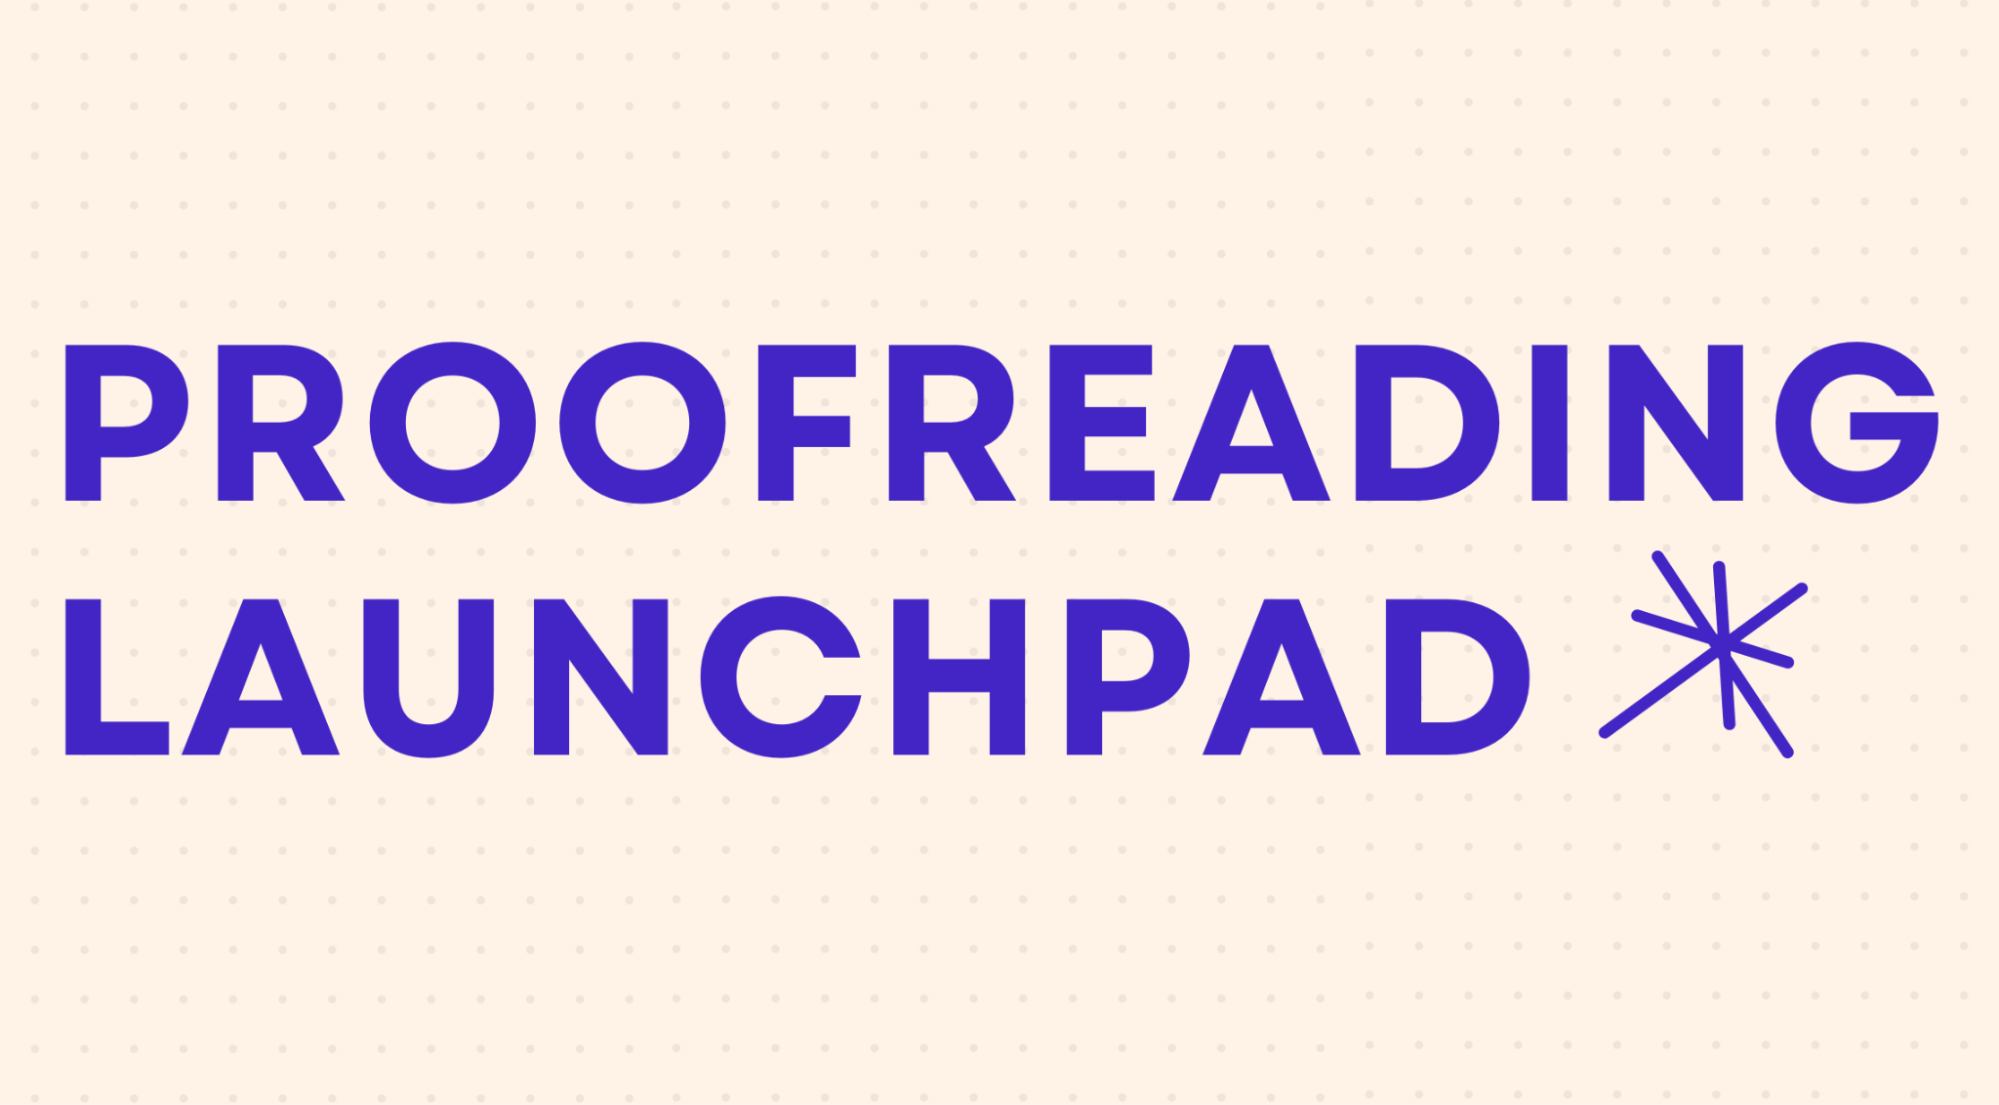 Proofreading Launchpad